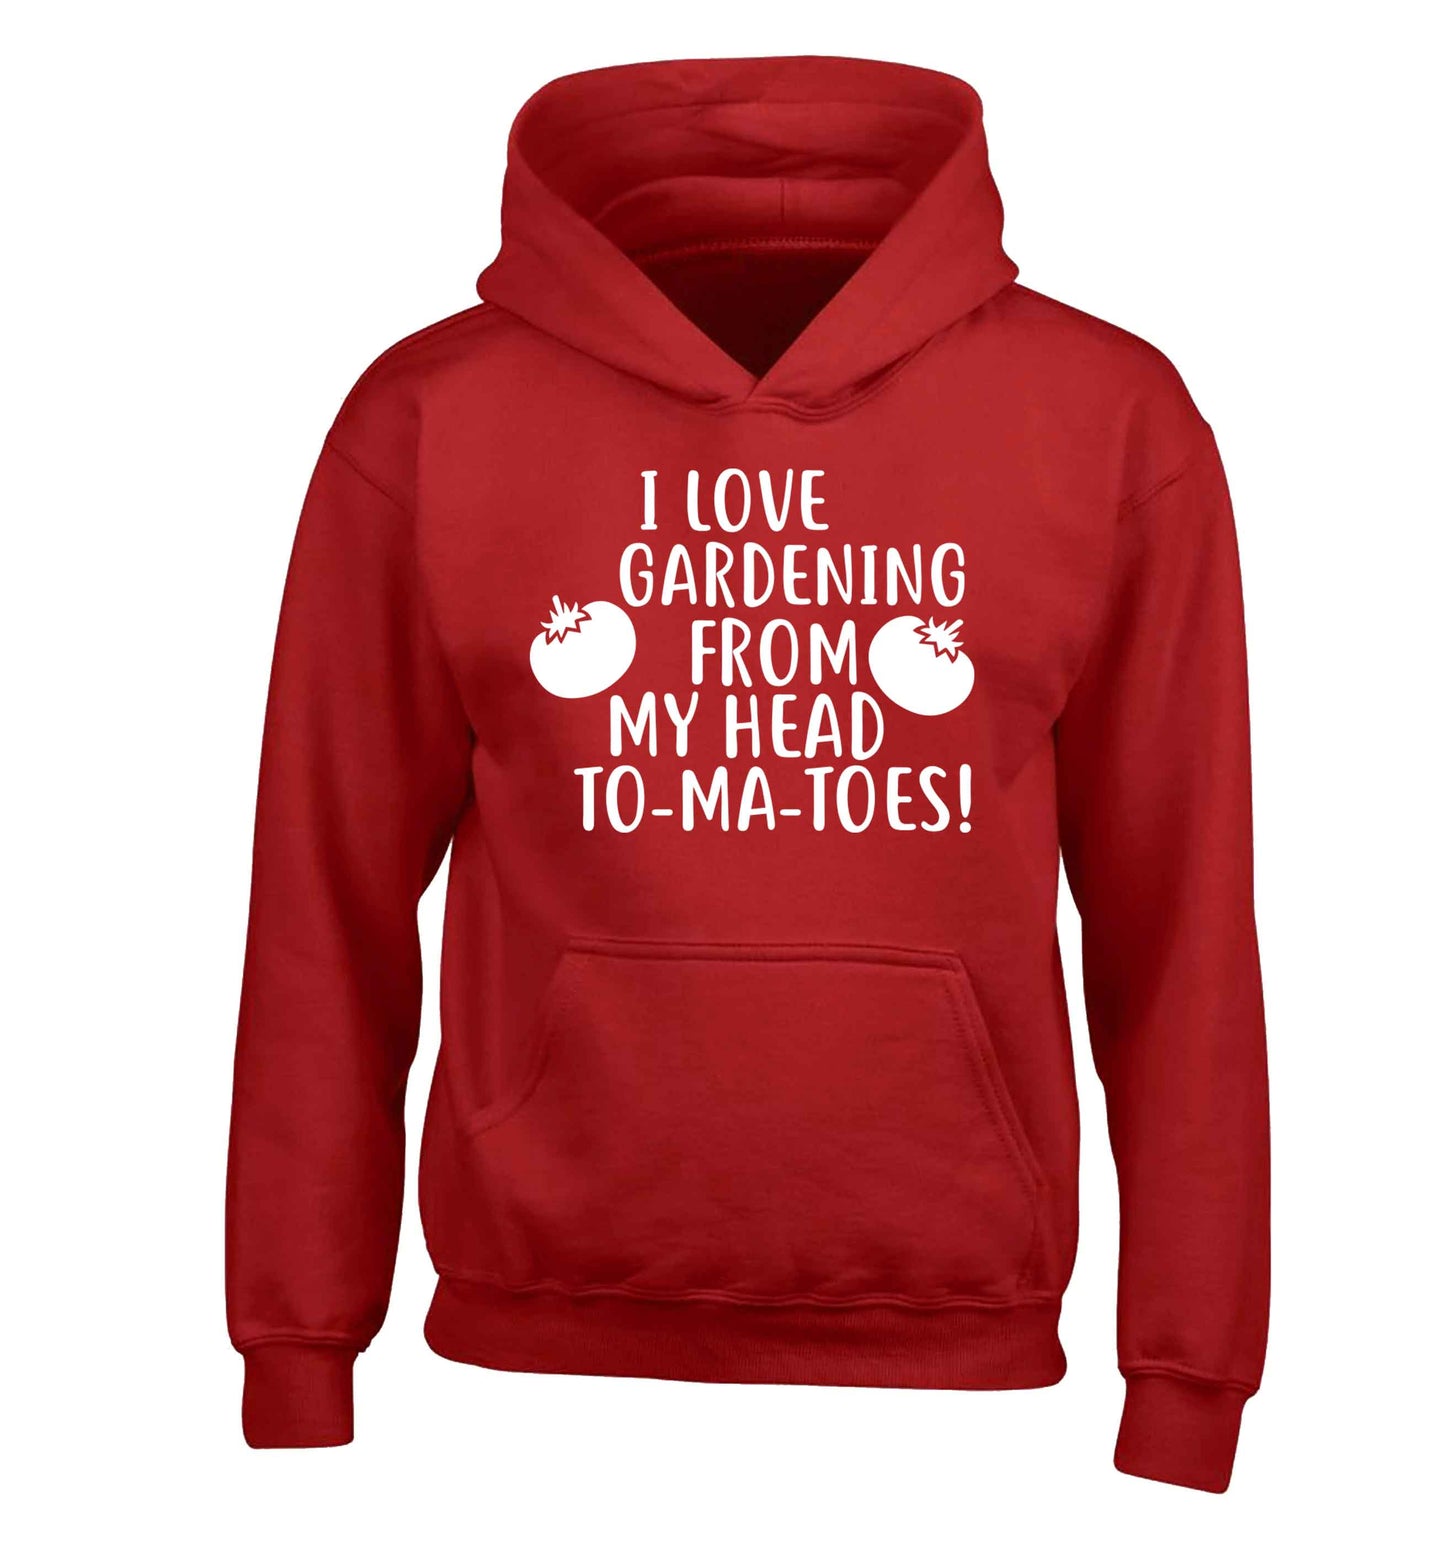 I love gardening from my head to-ma-toes children's red hoodie 12-13 Years